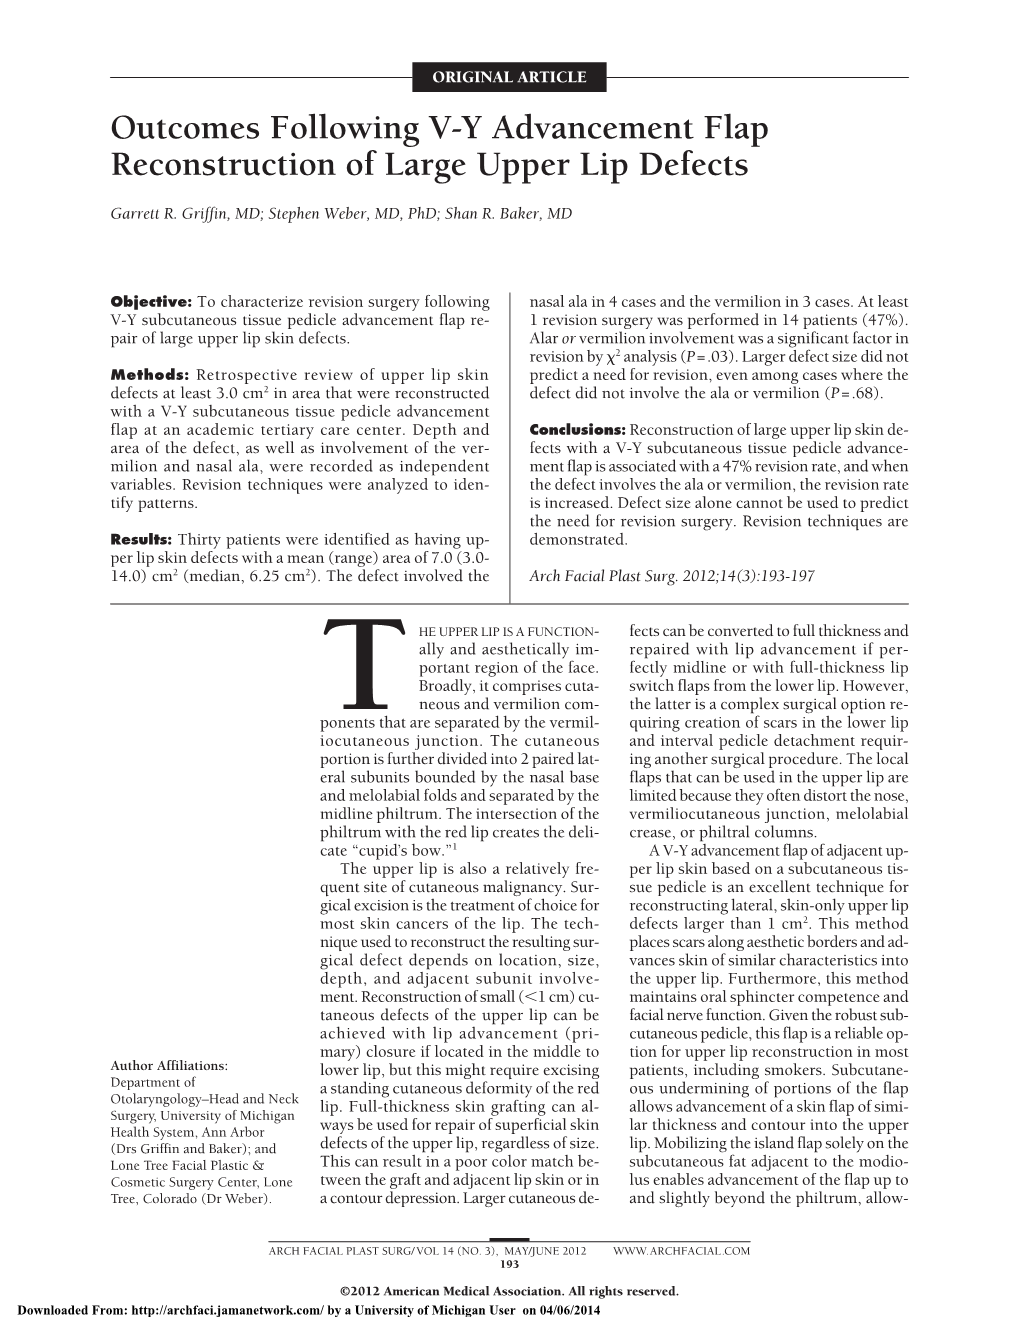 Outcomes Following V-Y Advancement Flap Reconstruction of Large Upper Lip Defects